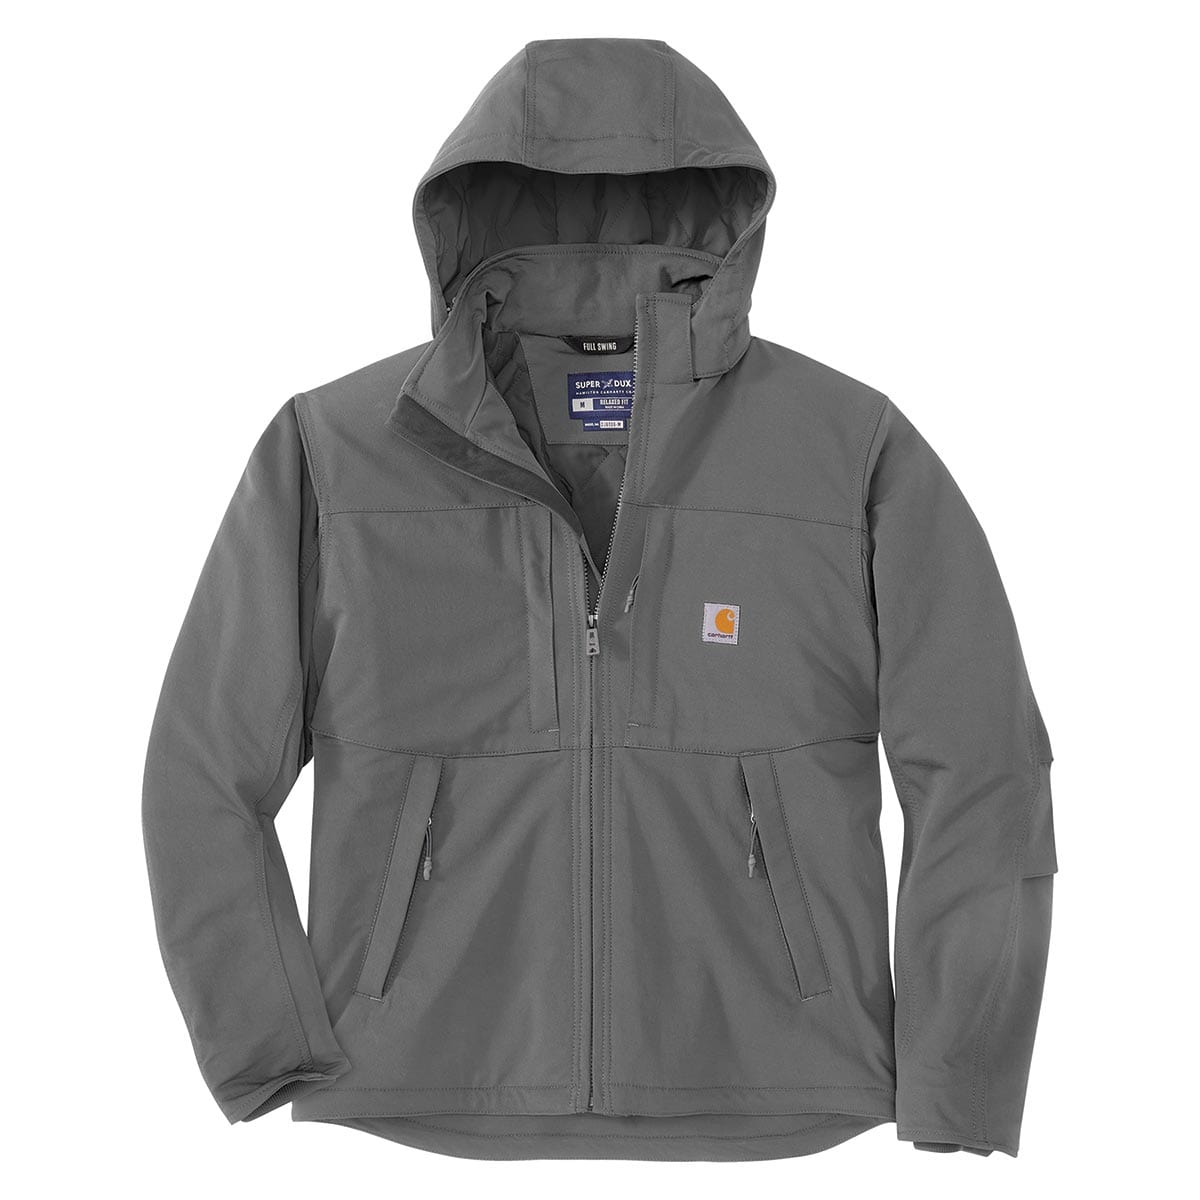 Carhartt Men's Montana Midweight Insulated Jacket at Tractor Supply Co.